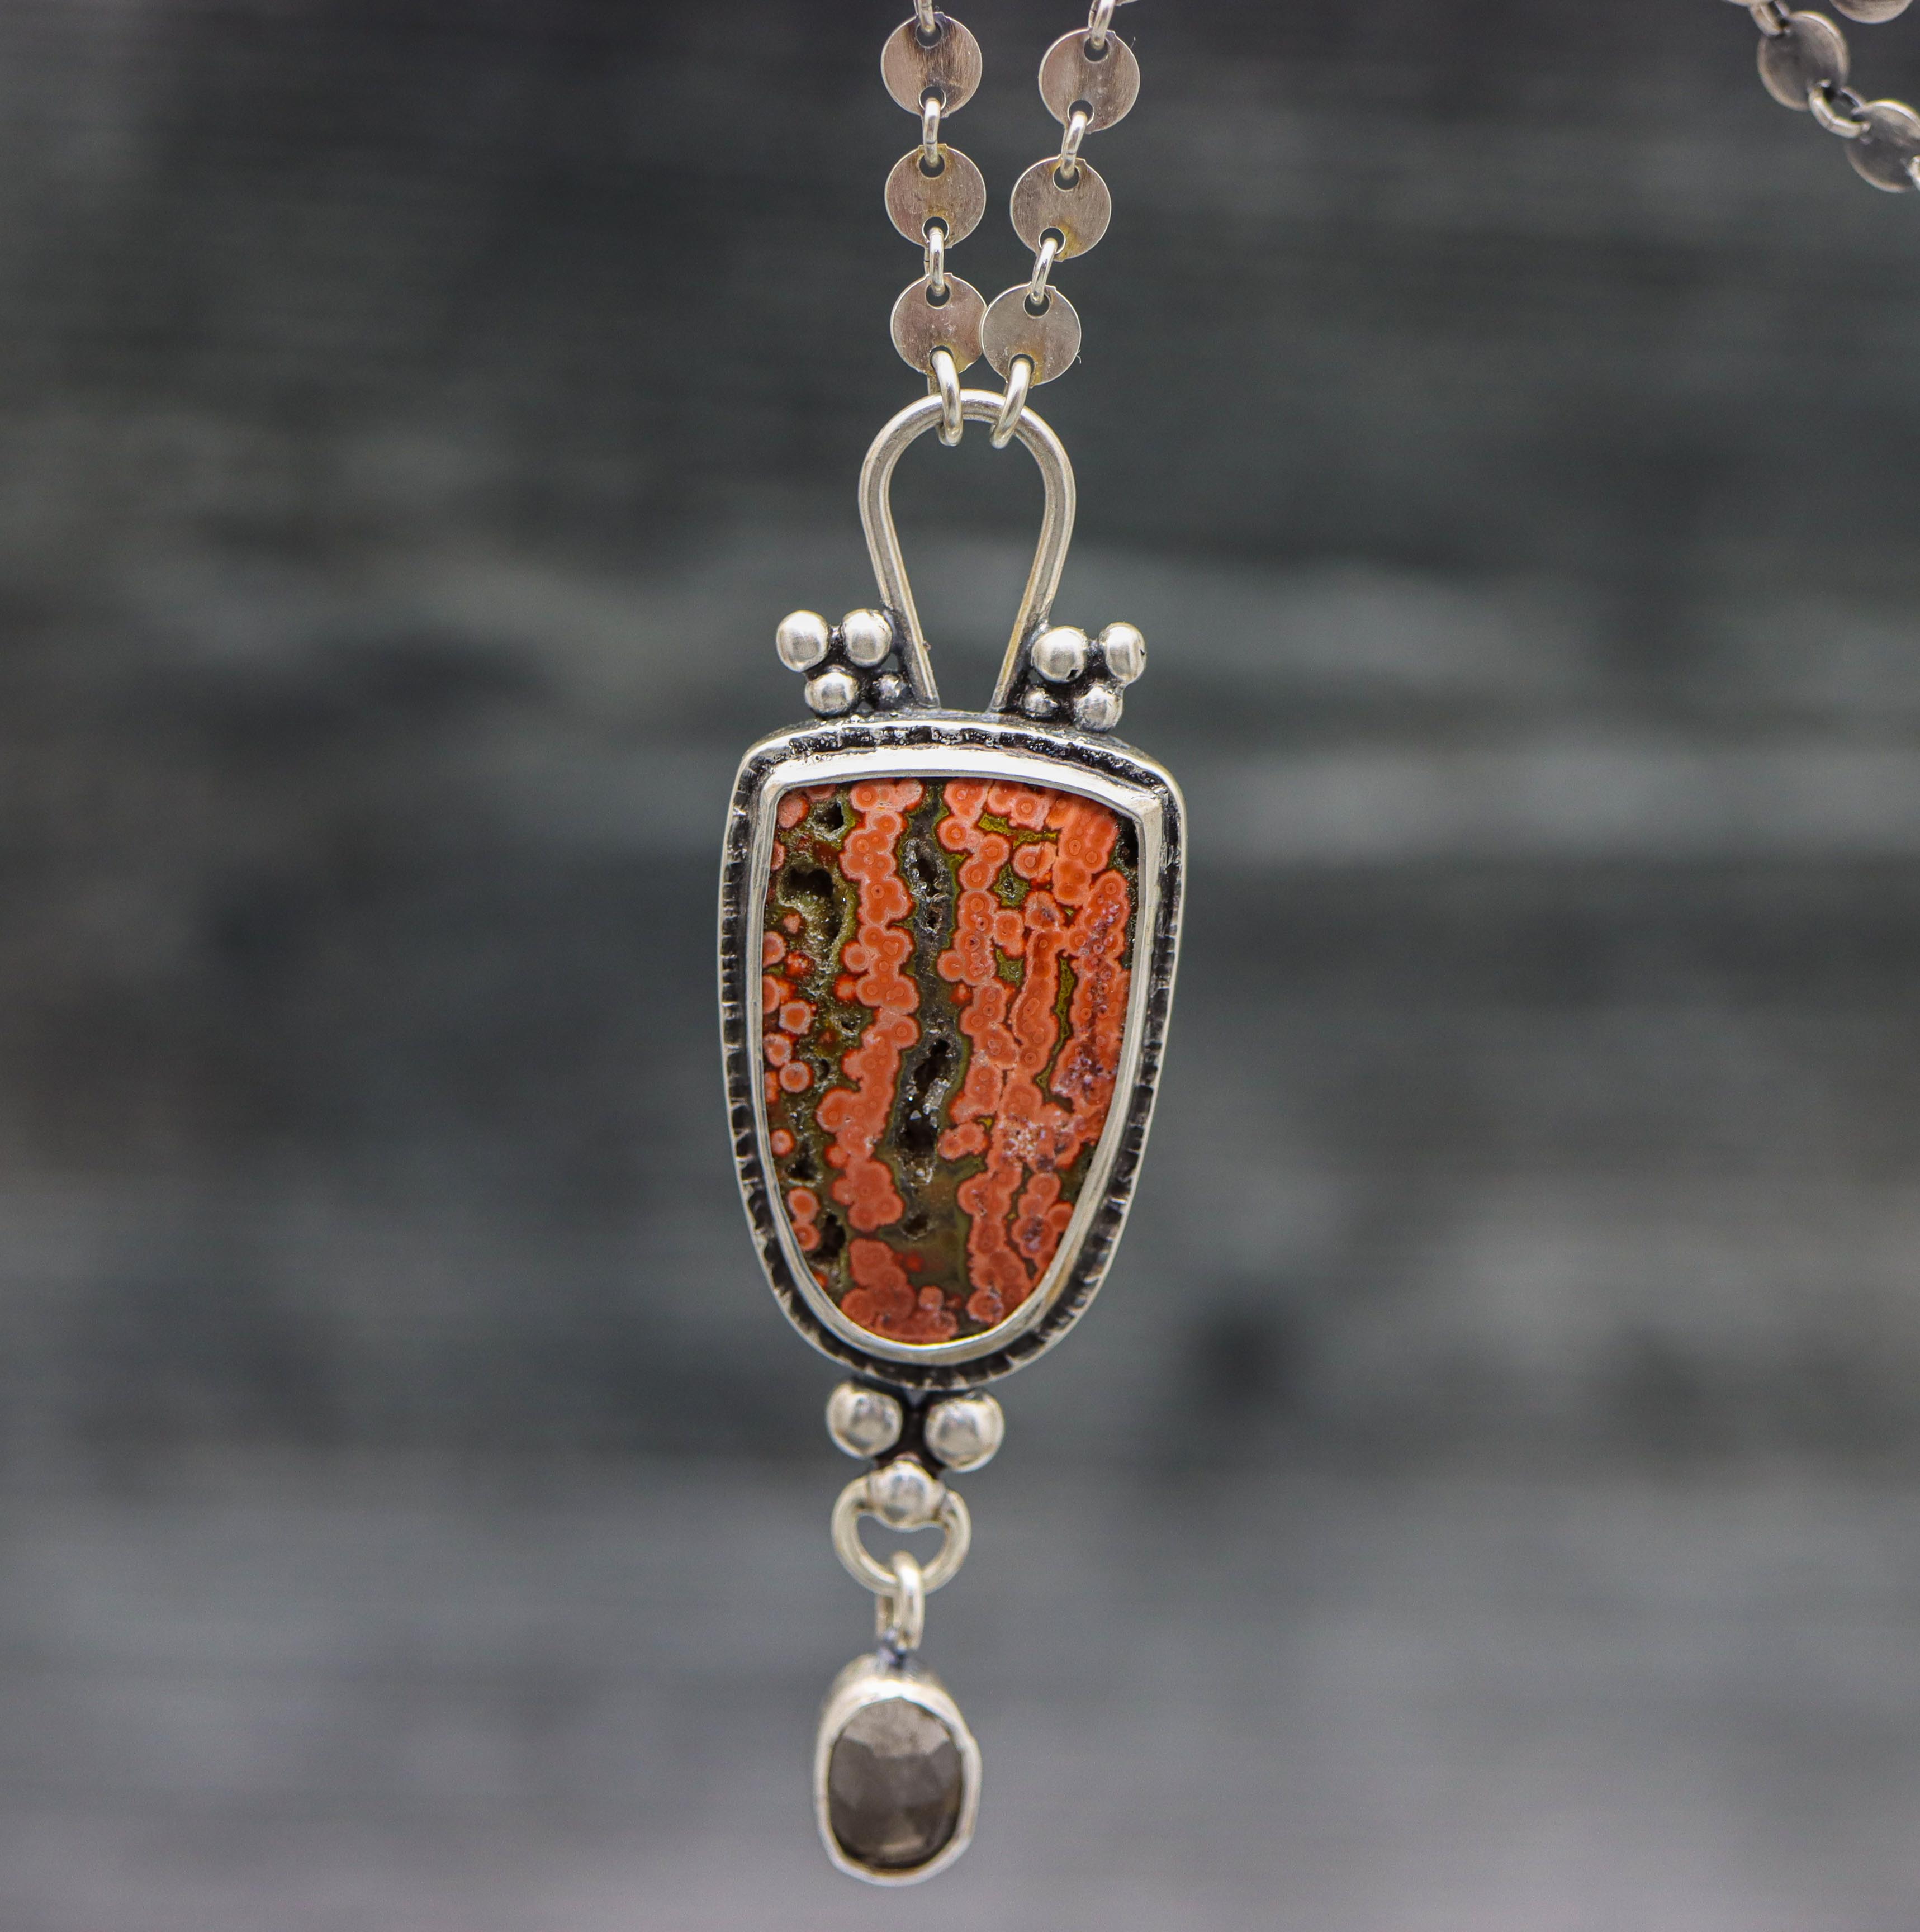 Orbicual Jasper and Agni Manitite Pendant Sterling Silver One Of a Kind Gemstone Necklace